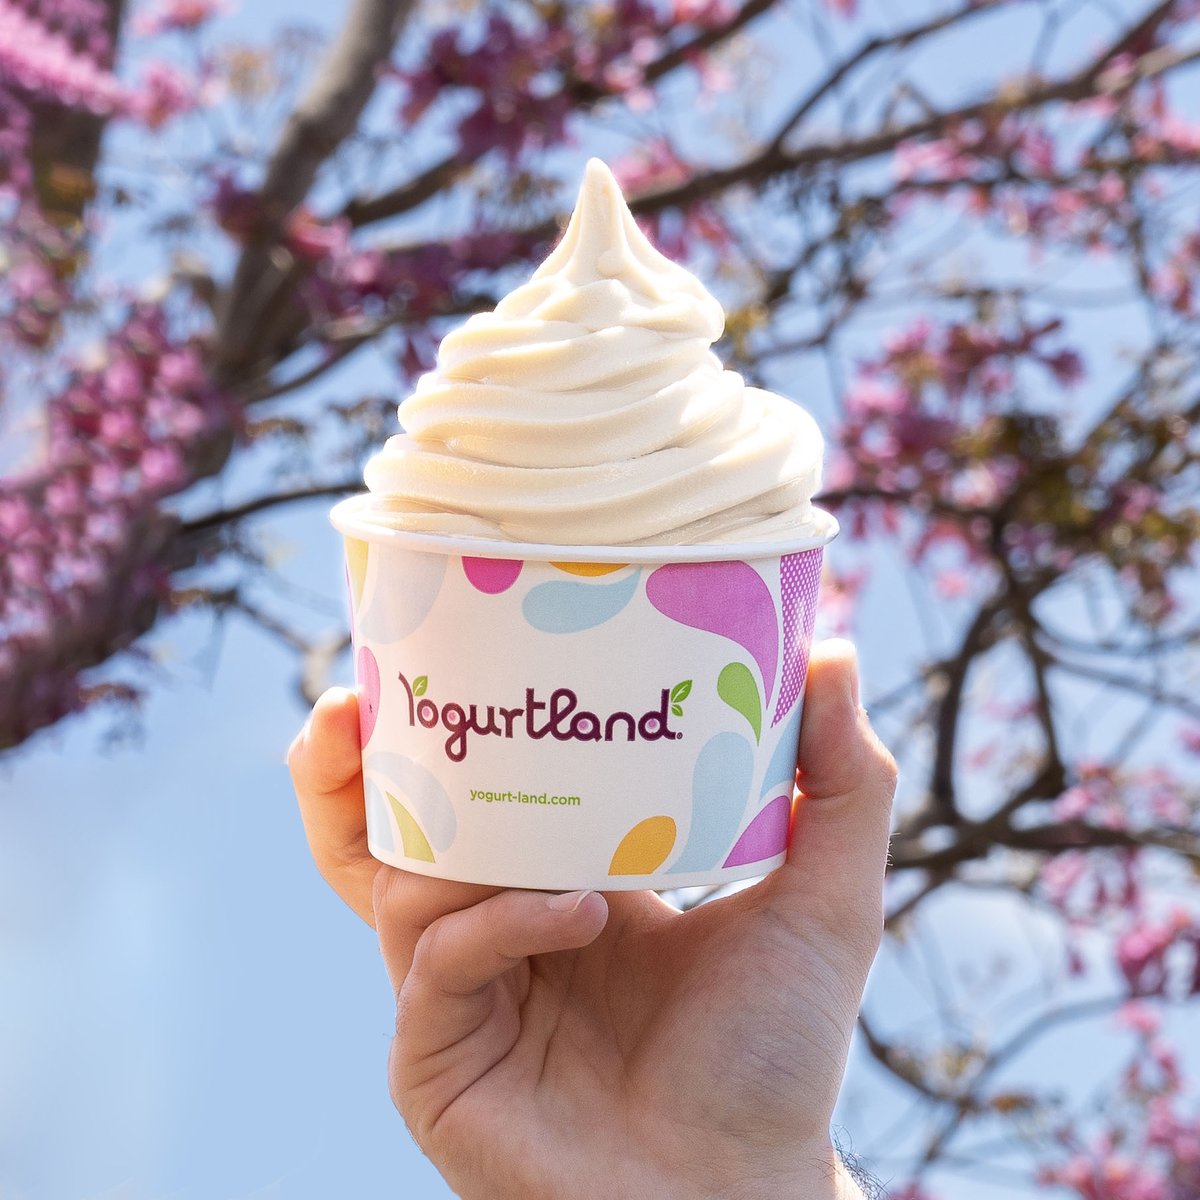 What toppings are you putting on this Milk & Honey swirl?! ⬇️ Hurry, get it before it's gone! #yogurtland #milkandhoney